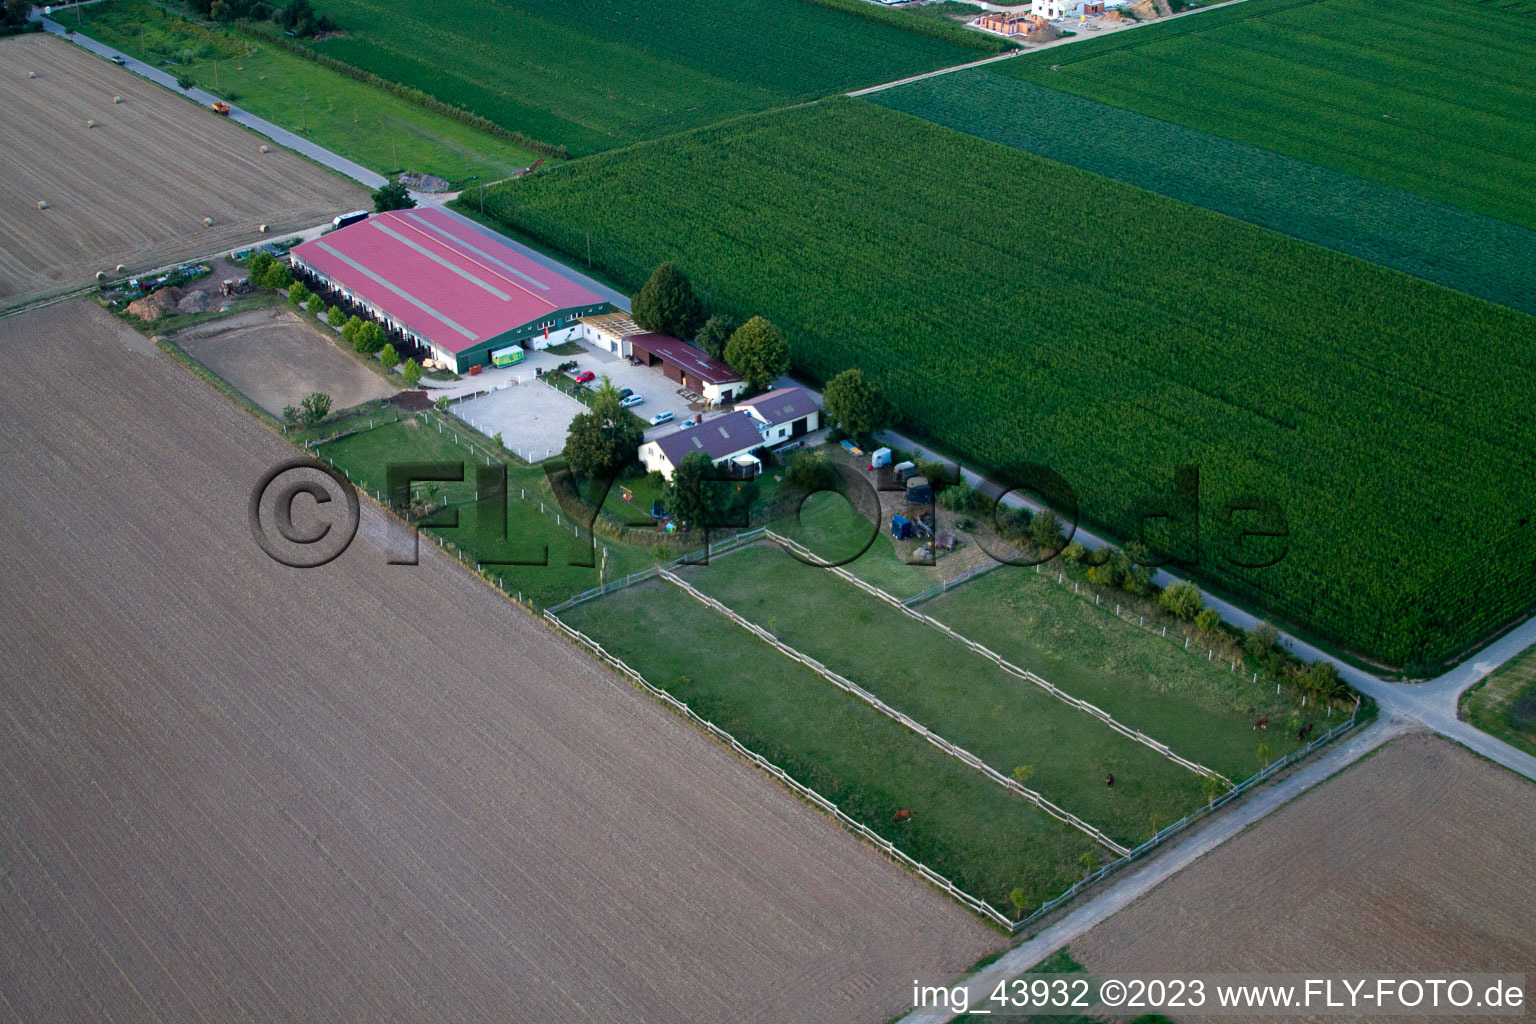 Foal yard in Steinweiler in the state Rhineland-Palatinate, Germany seen from a drone